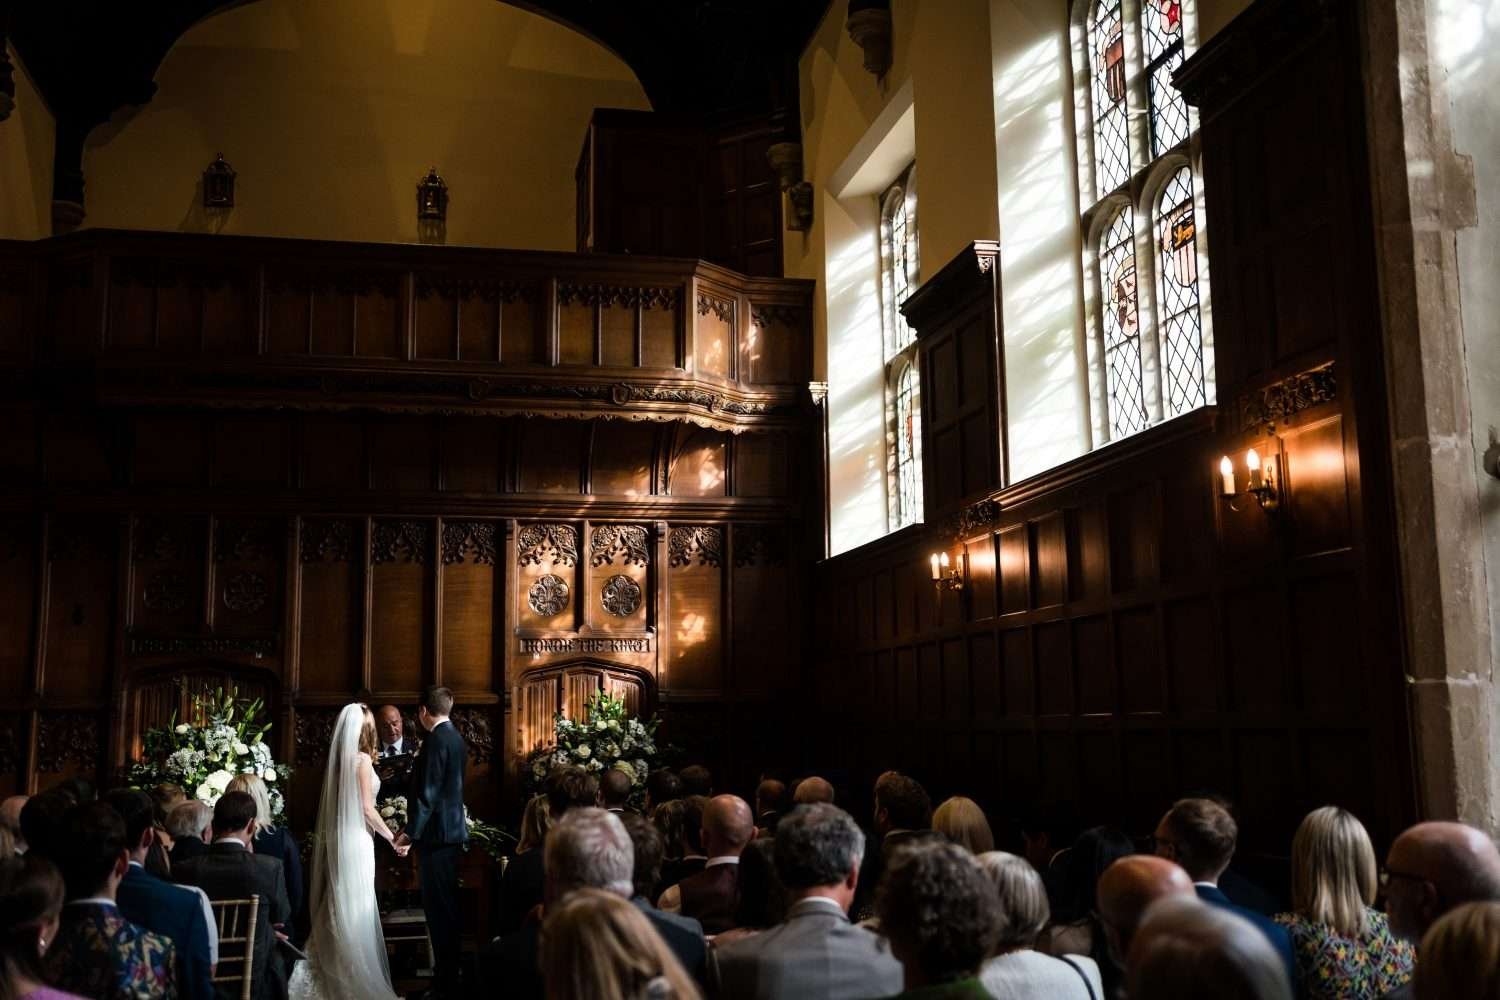 Sunlight streams from high elizabethan leaded windows on the right of a wood panelled room where a bride and groom are being married amid a crowd of seated family and friends. 